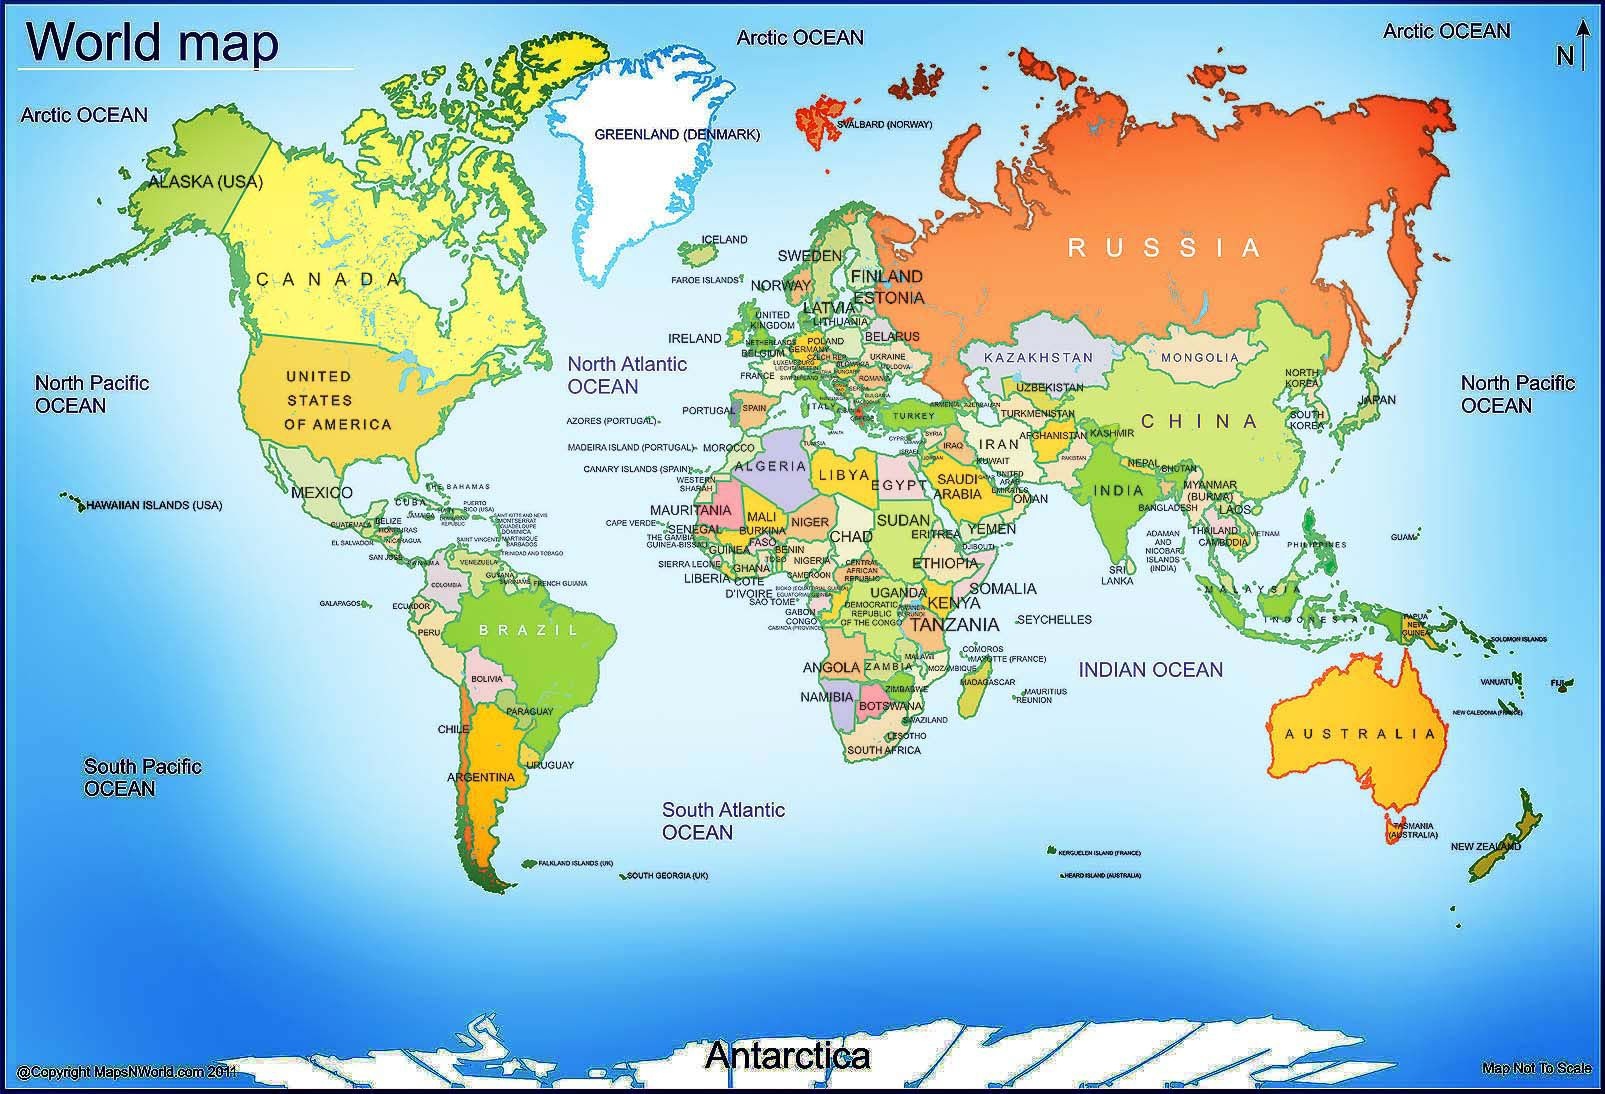 World Map - Free Large Images | Maps | World Map With Countries - Free Printable World Map